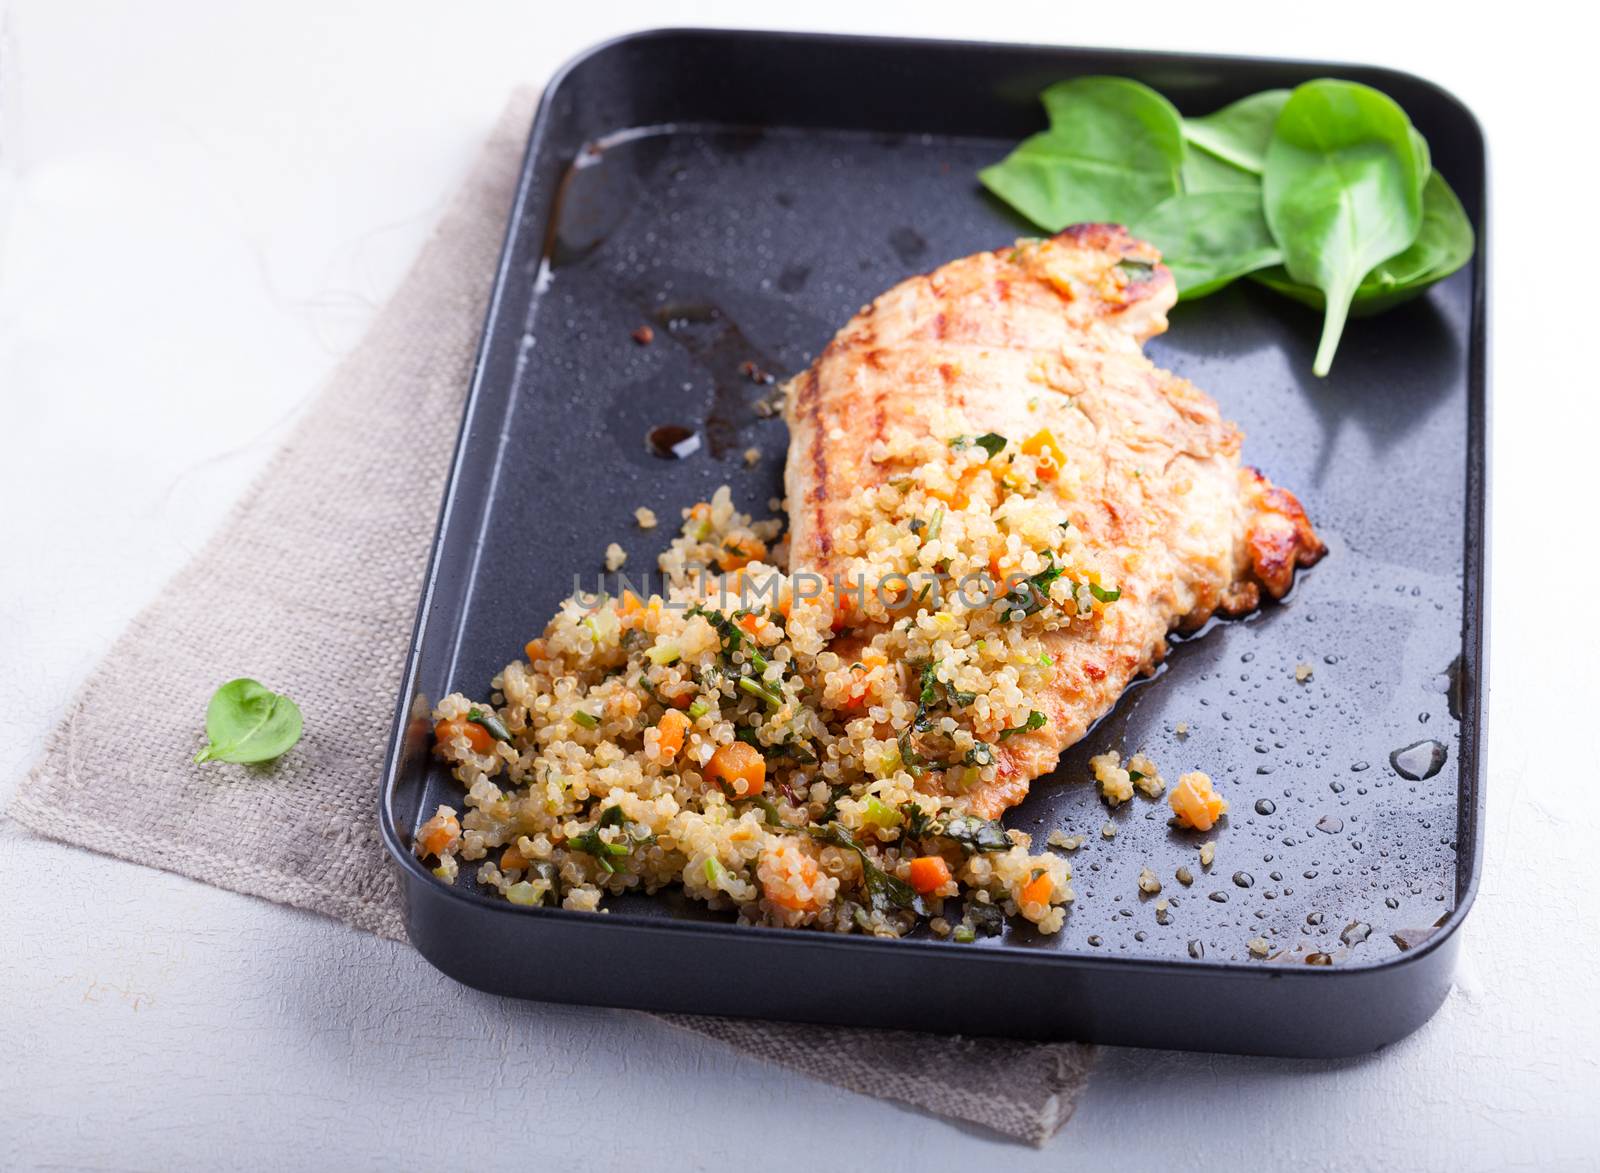 Grilled chicken breast  with quinoa and vegetables